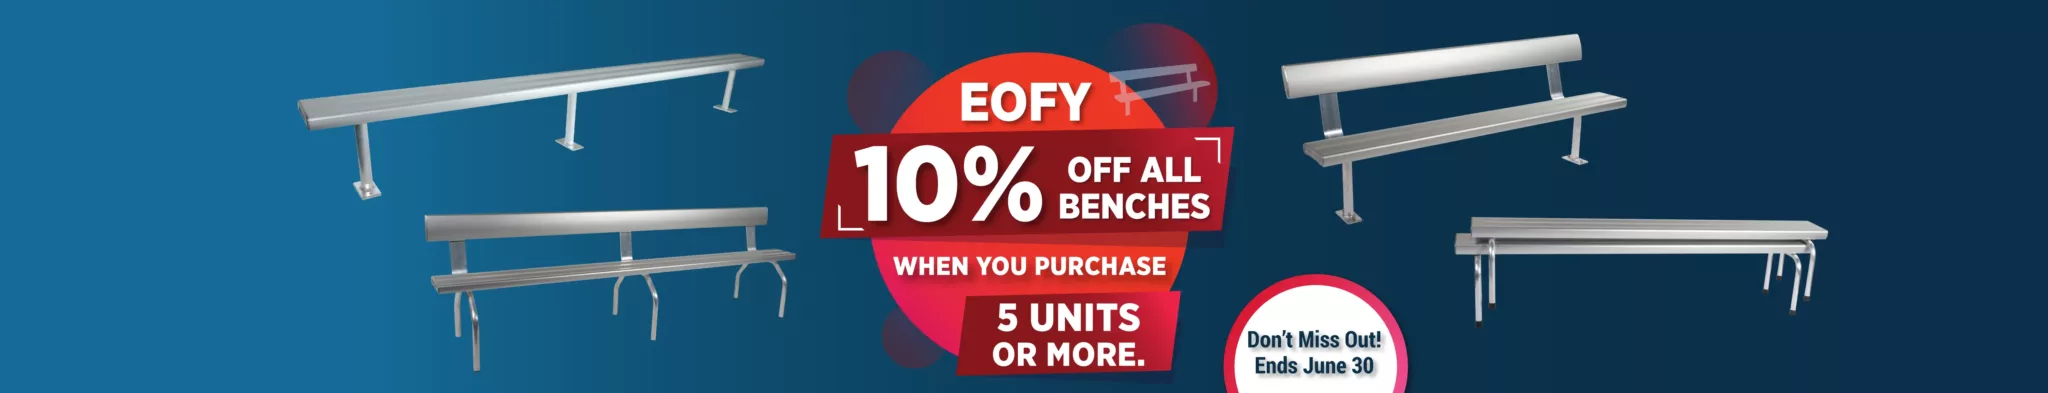 Felton 's Biggest Ever EOFY Sale 10% Off Benches